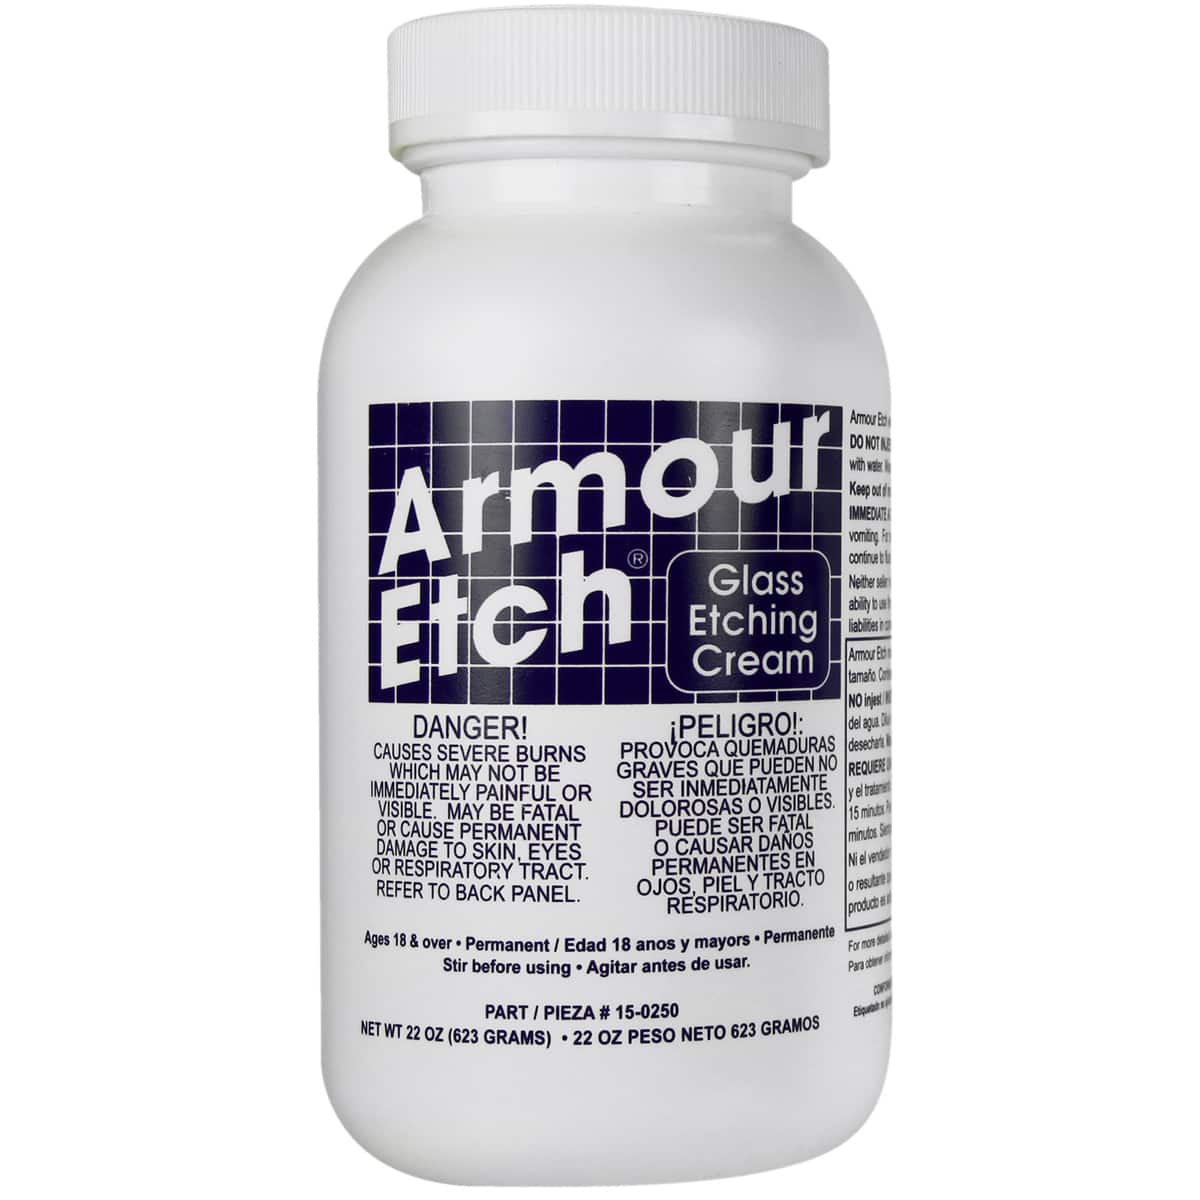  Armour Etch Glass Etching Cream 2.8 Ounce New Look!, (15-0150)  : Arts, Crafts & Sewing